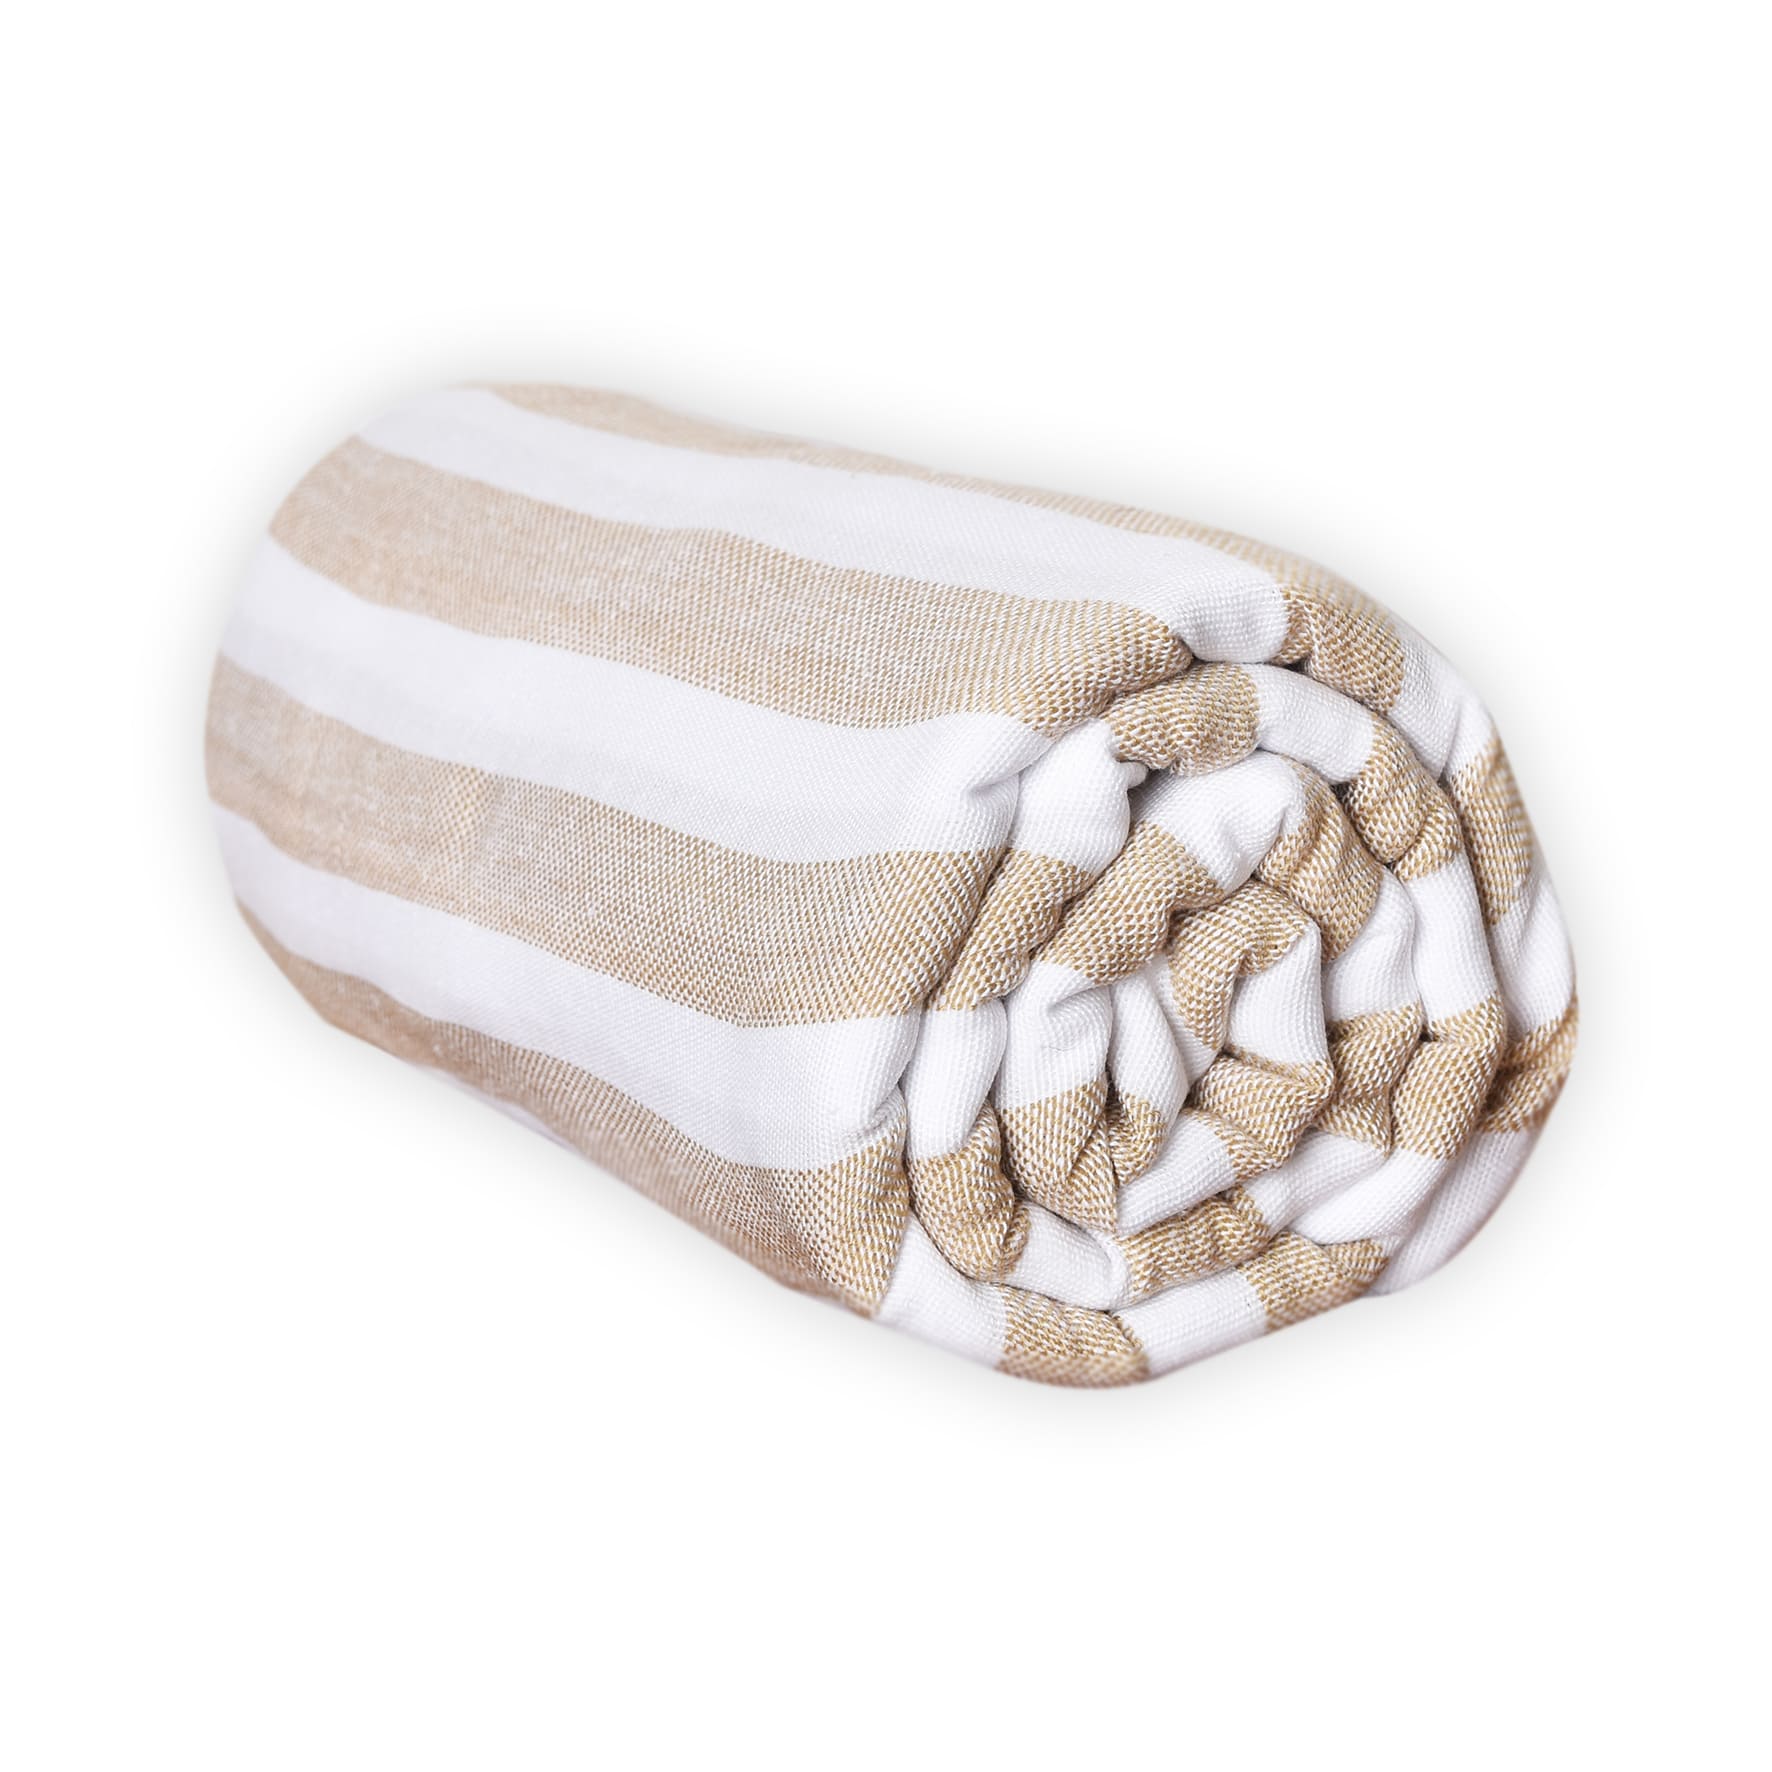 MEXICAN TEXTILES / Las Bayadas - La Catalina Beach Blanket / This lovely lightly woven beach blanket is made in Mexico, using recycled cotton and the softest traditional Mexican fabrics.